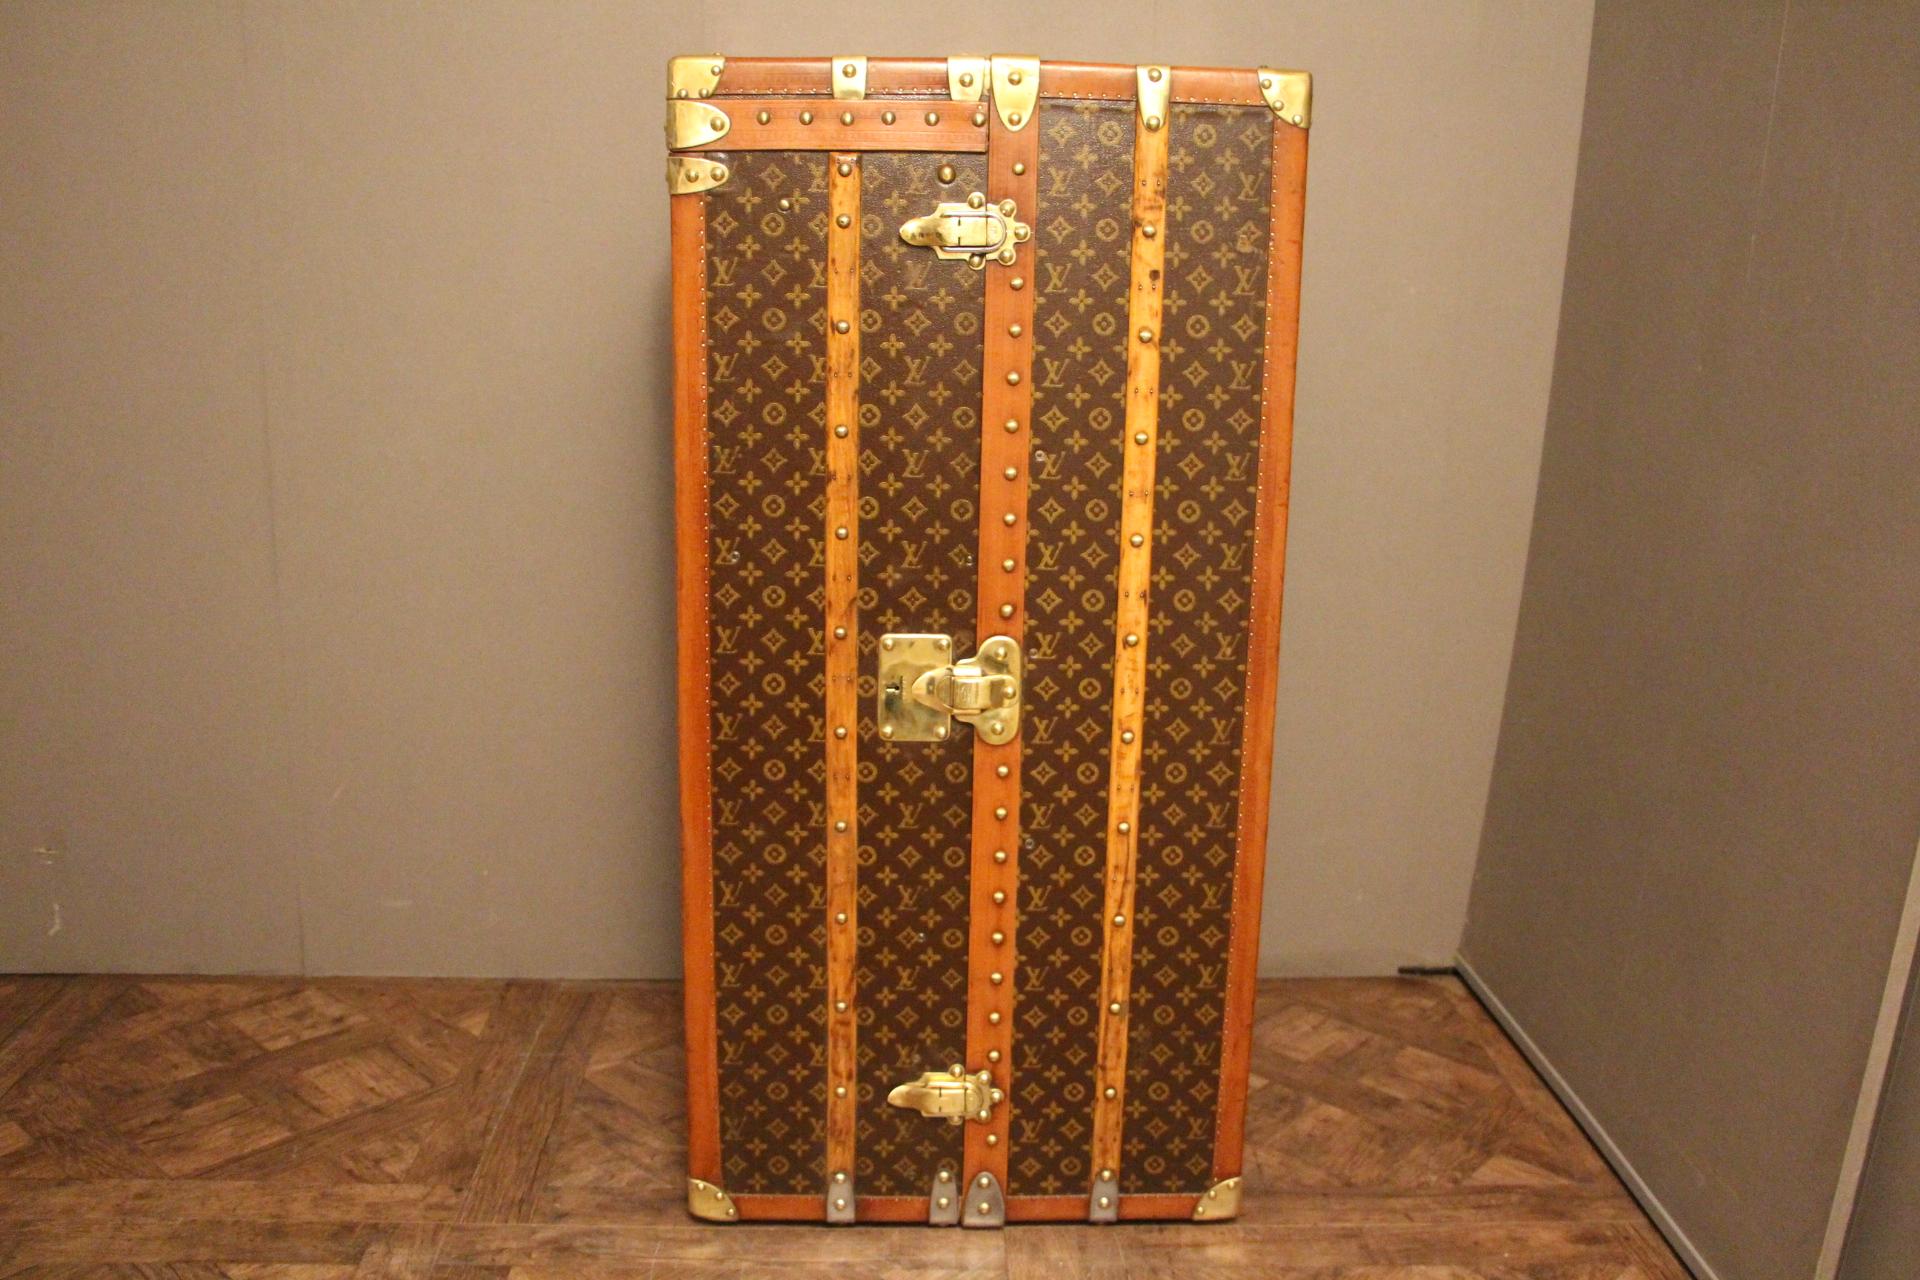 This impressive 1930s Louis Vuitton wardrobe features stenciled monogram canvas, lozine trims, brass LV stamped locks and studs as well as its lift top. It has got a beautiful warm patina.
Customized painted yellow red stripes on the top add